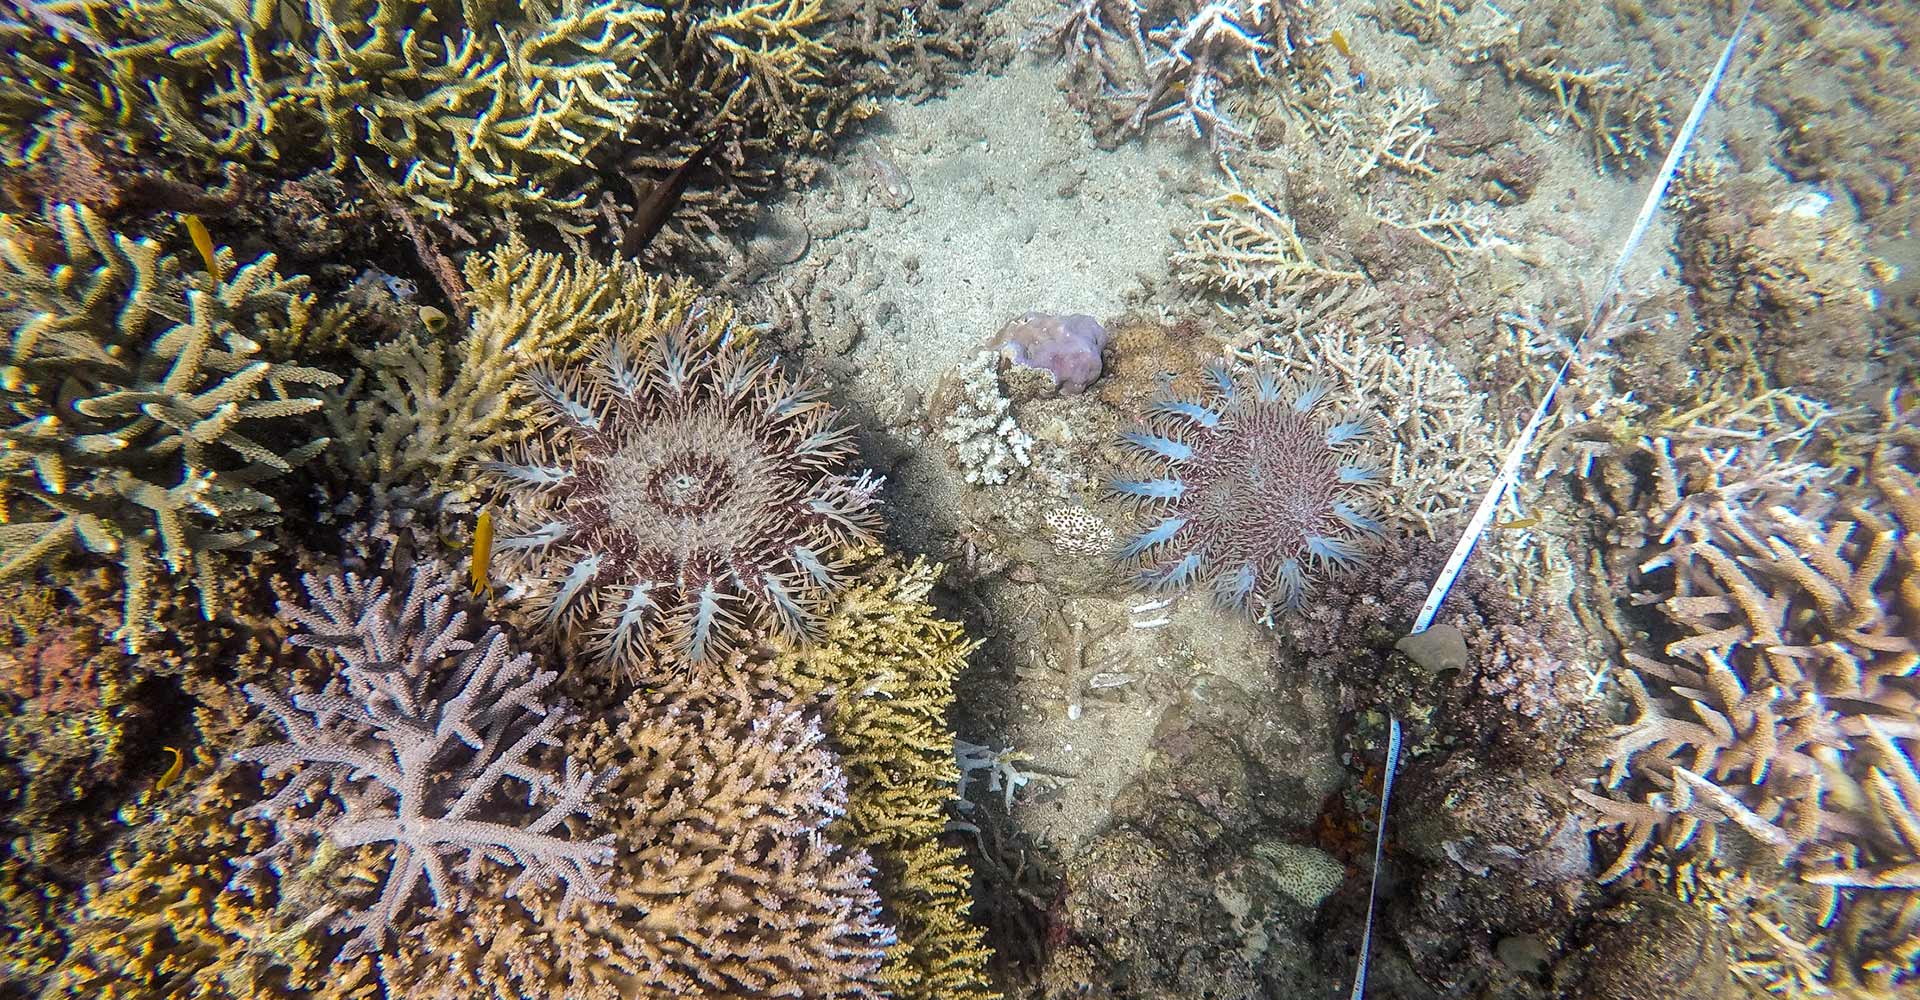 Crown-of-Thorns Starfish (COTS)